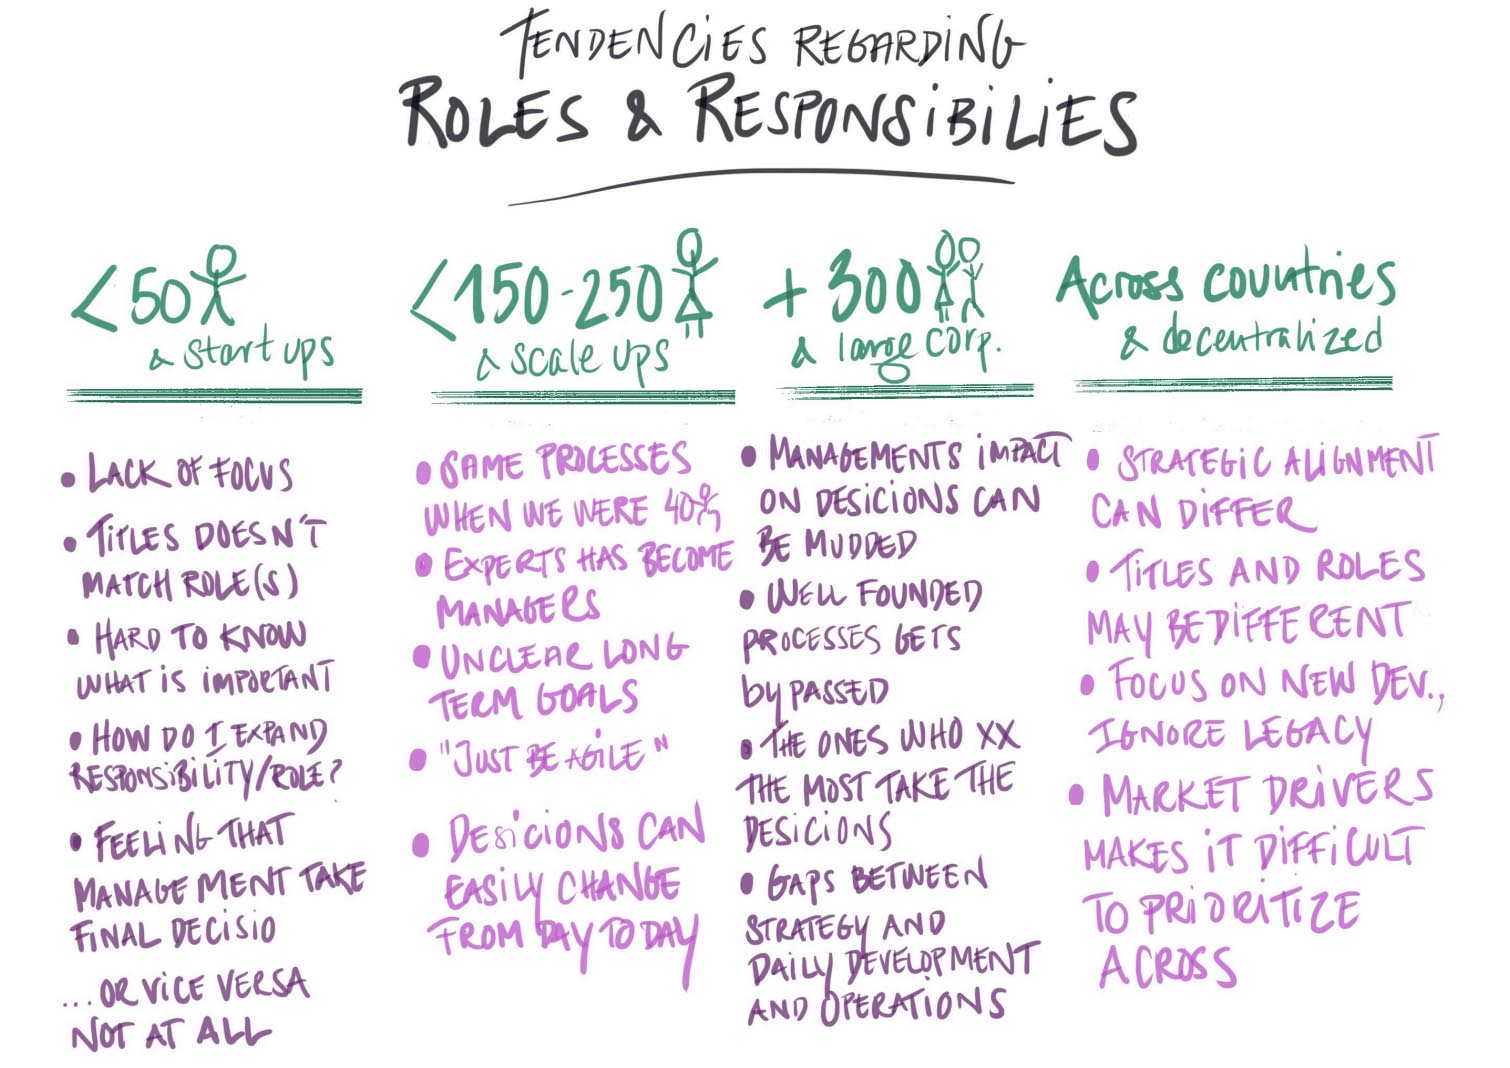 Roles and responsibilties - and their frustrations change dependding on company size and type.